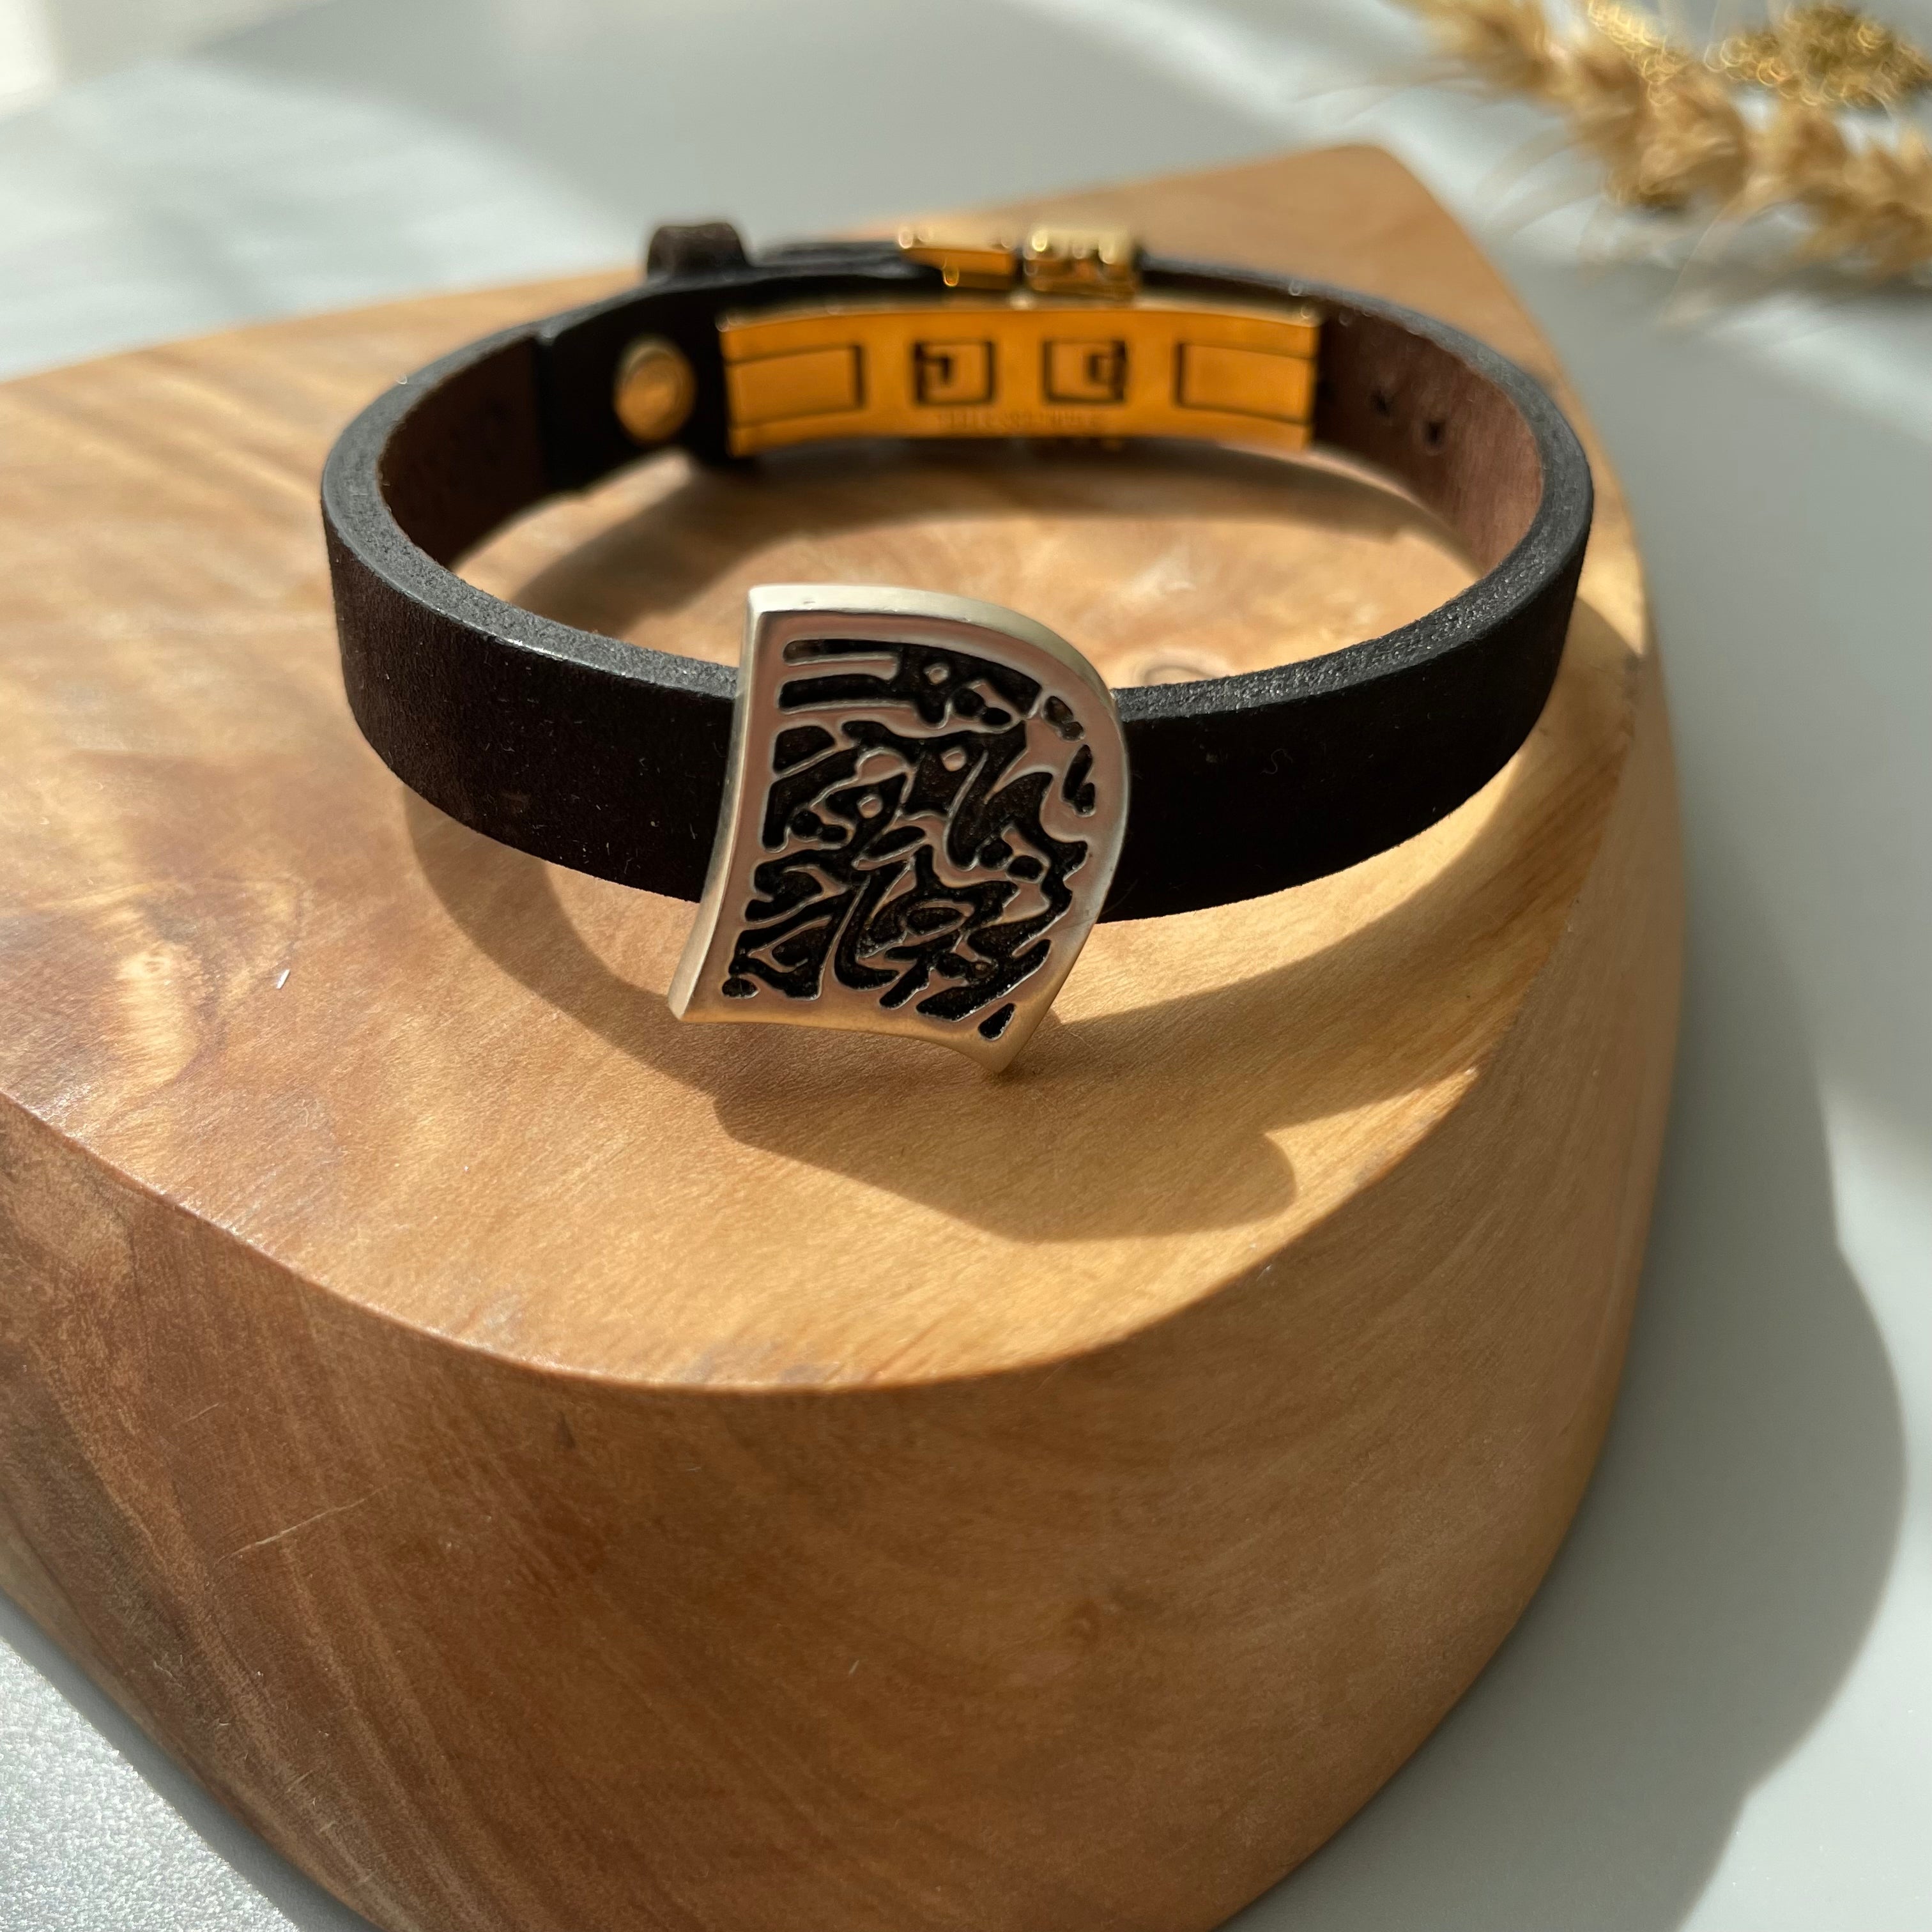 Handmade Silver and Leather Men's Bracelet with Persian Calligraphy